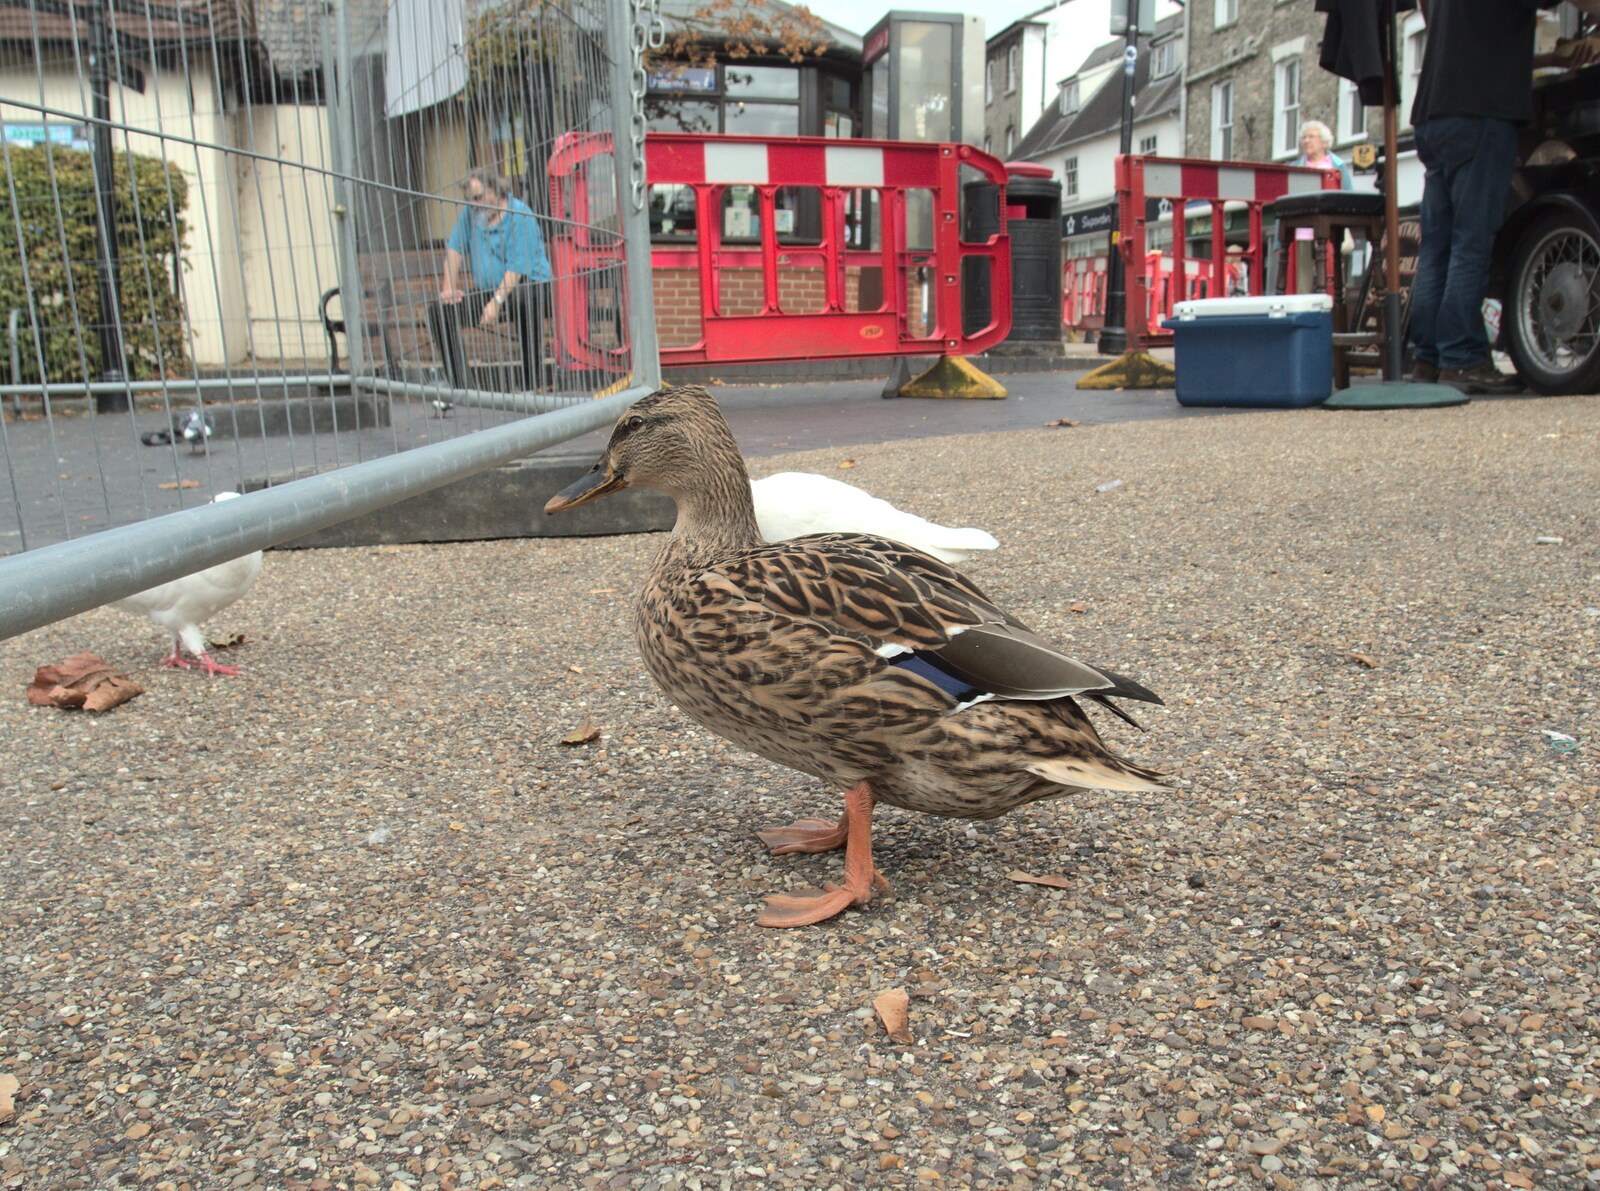 A duck waddles around by the Mere from A House Built of Wax and Diss Randomness, Southwark Street, London - 30th September 2014